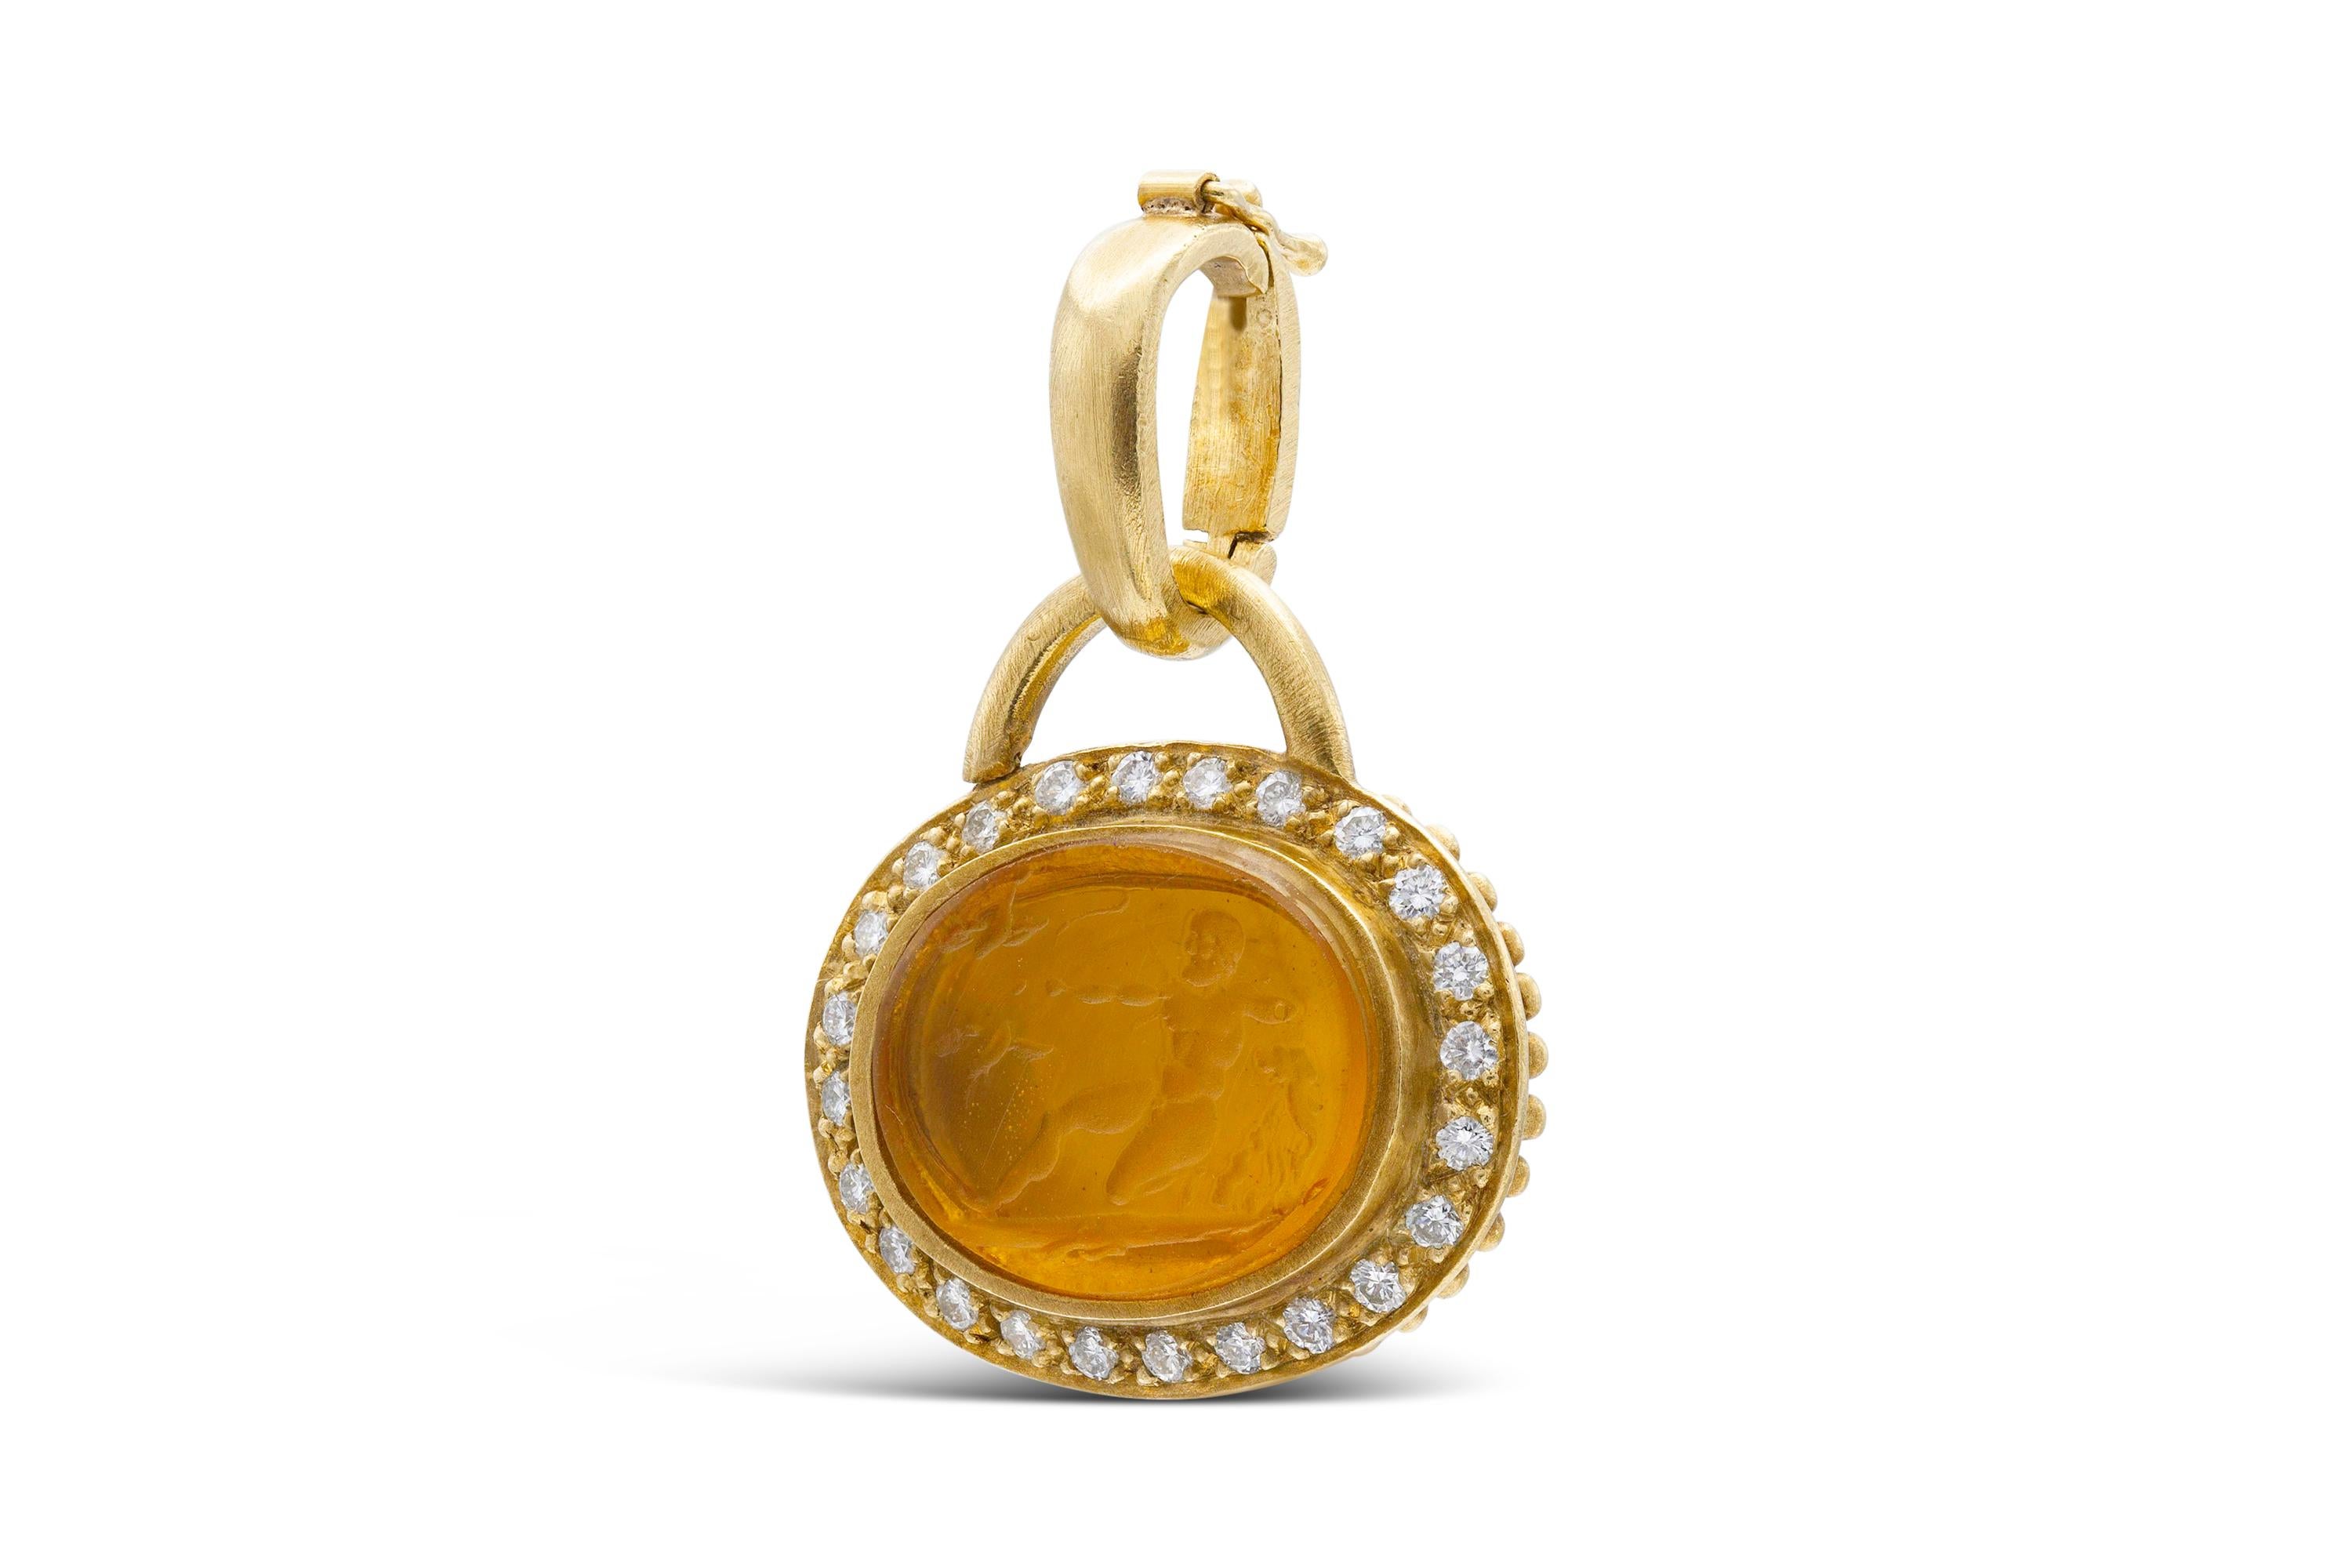 Finely crafted in 18k yellow gold with a carved Citrine intaglio, featuring Round cut diamonds weighing approximately a total of 0.60 carats.